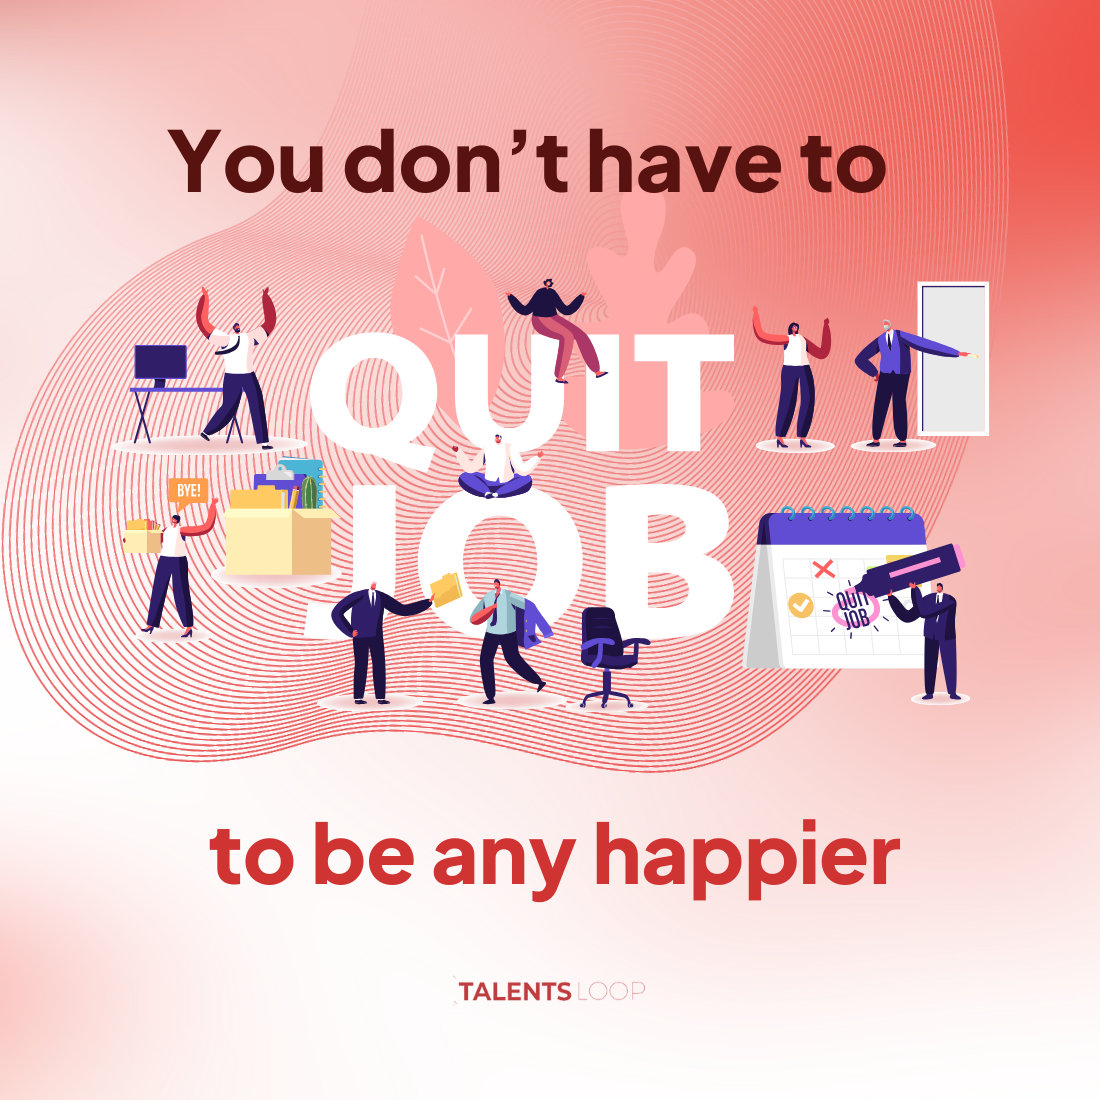 You don’t have to quit your job to be any happier